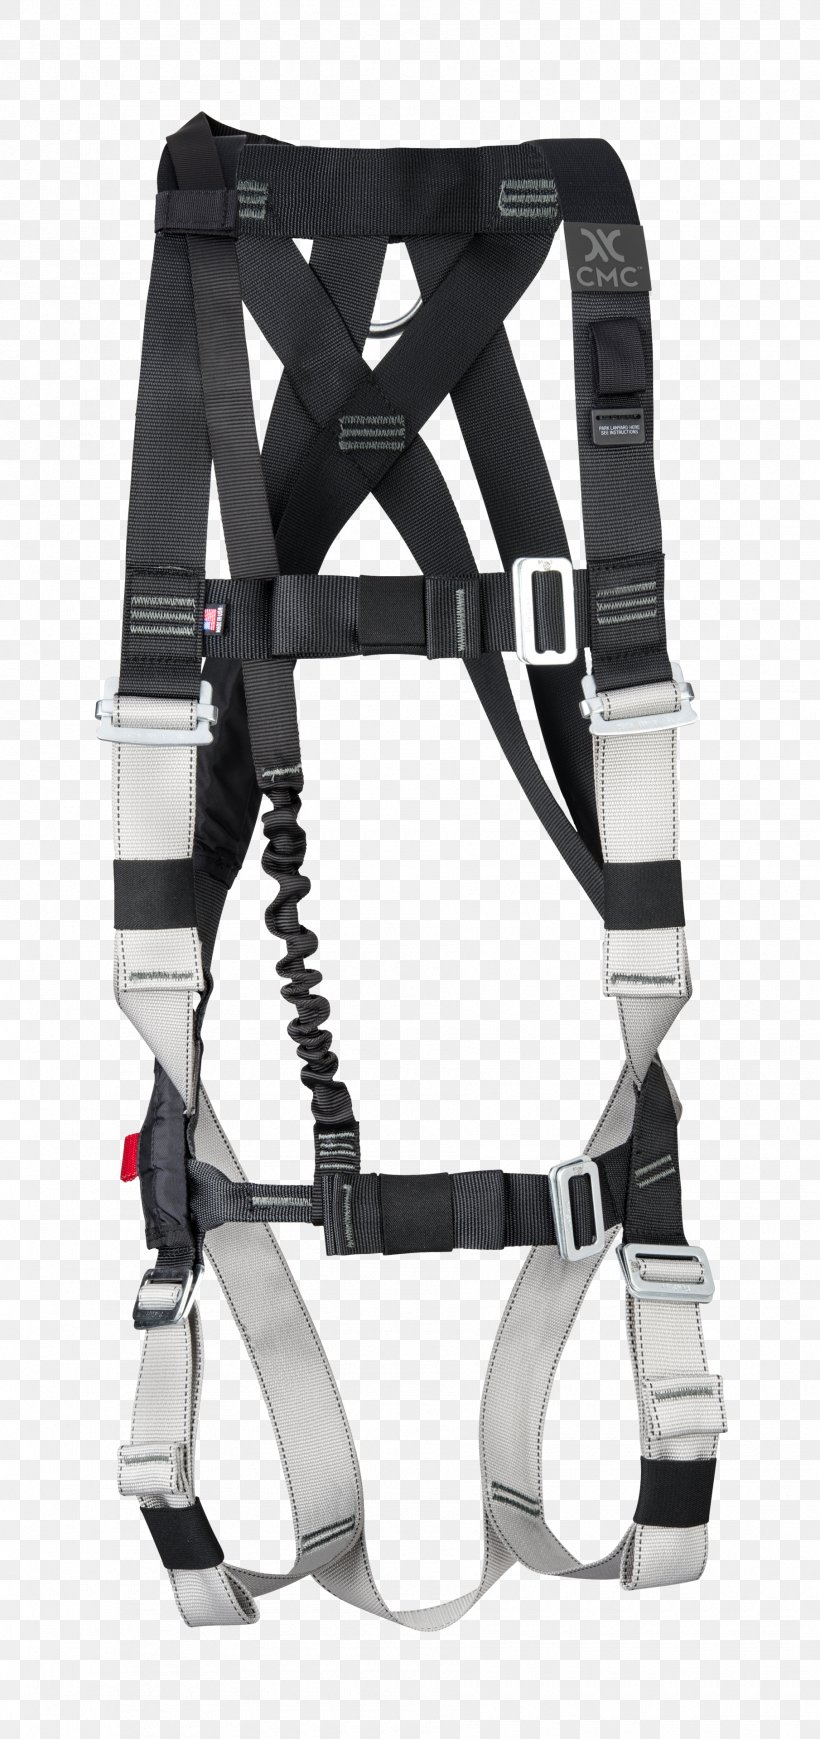 Climbing Harnesses Rope Rescue Rope Rescue Suspension Trauma, PNG, 1810x3840px, Climbing Harnesses, Abseiling, Belaying, Climbing Harness, Figure 8 Download Free